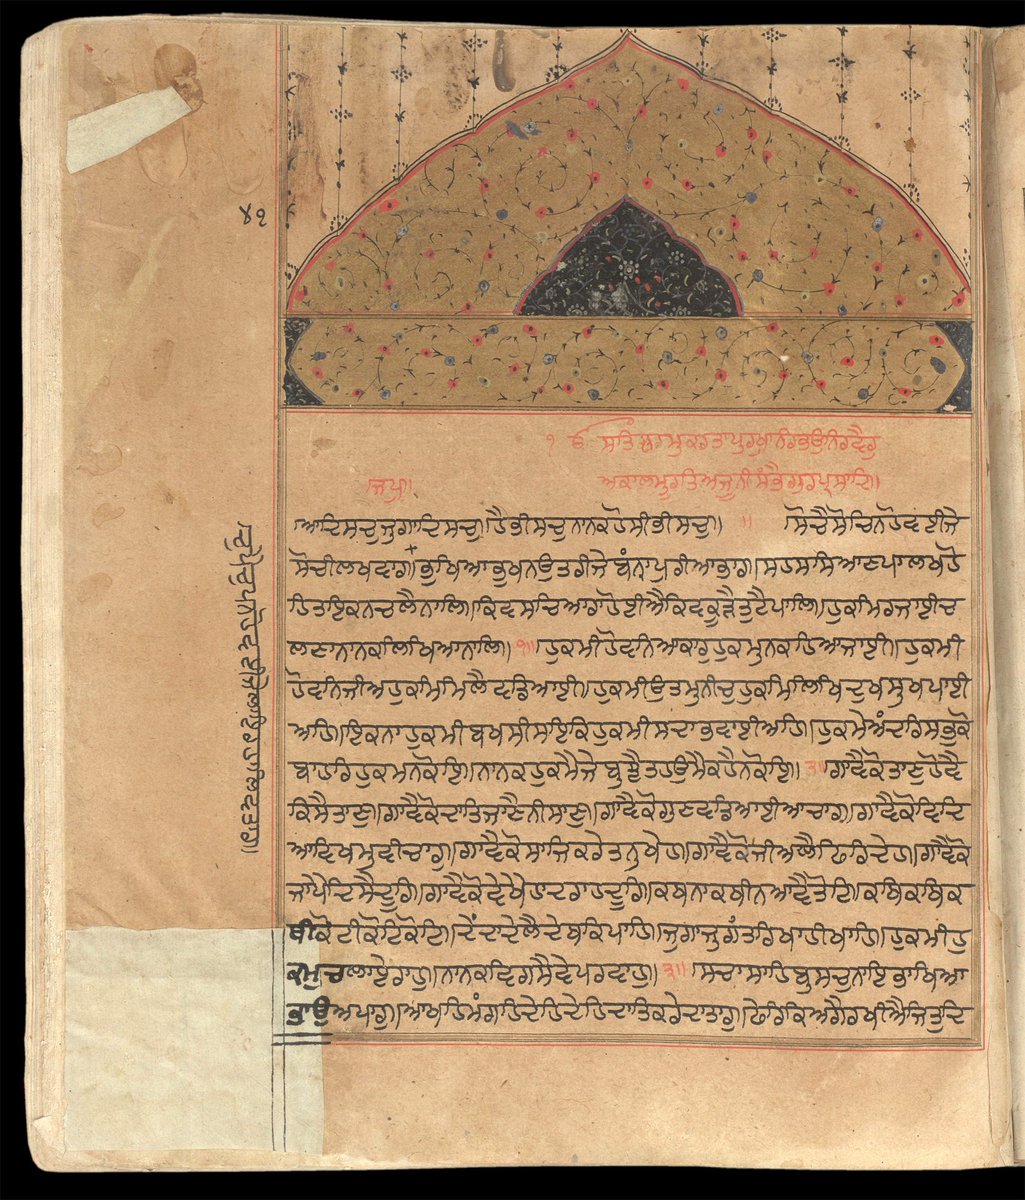 Having completed the holy book of  #Sikhs called  #GuruGranthSahib, Guru  #GobindSingh made it known at  #Nanded that henceforth, this book will be the next guru after his death. The eternal guru.From  @britishlibrary, c1660-75 the oldest surviving copy outside India. @DalrympleWill